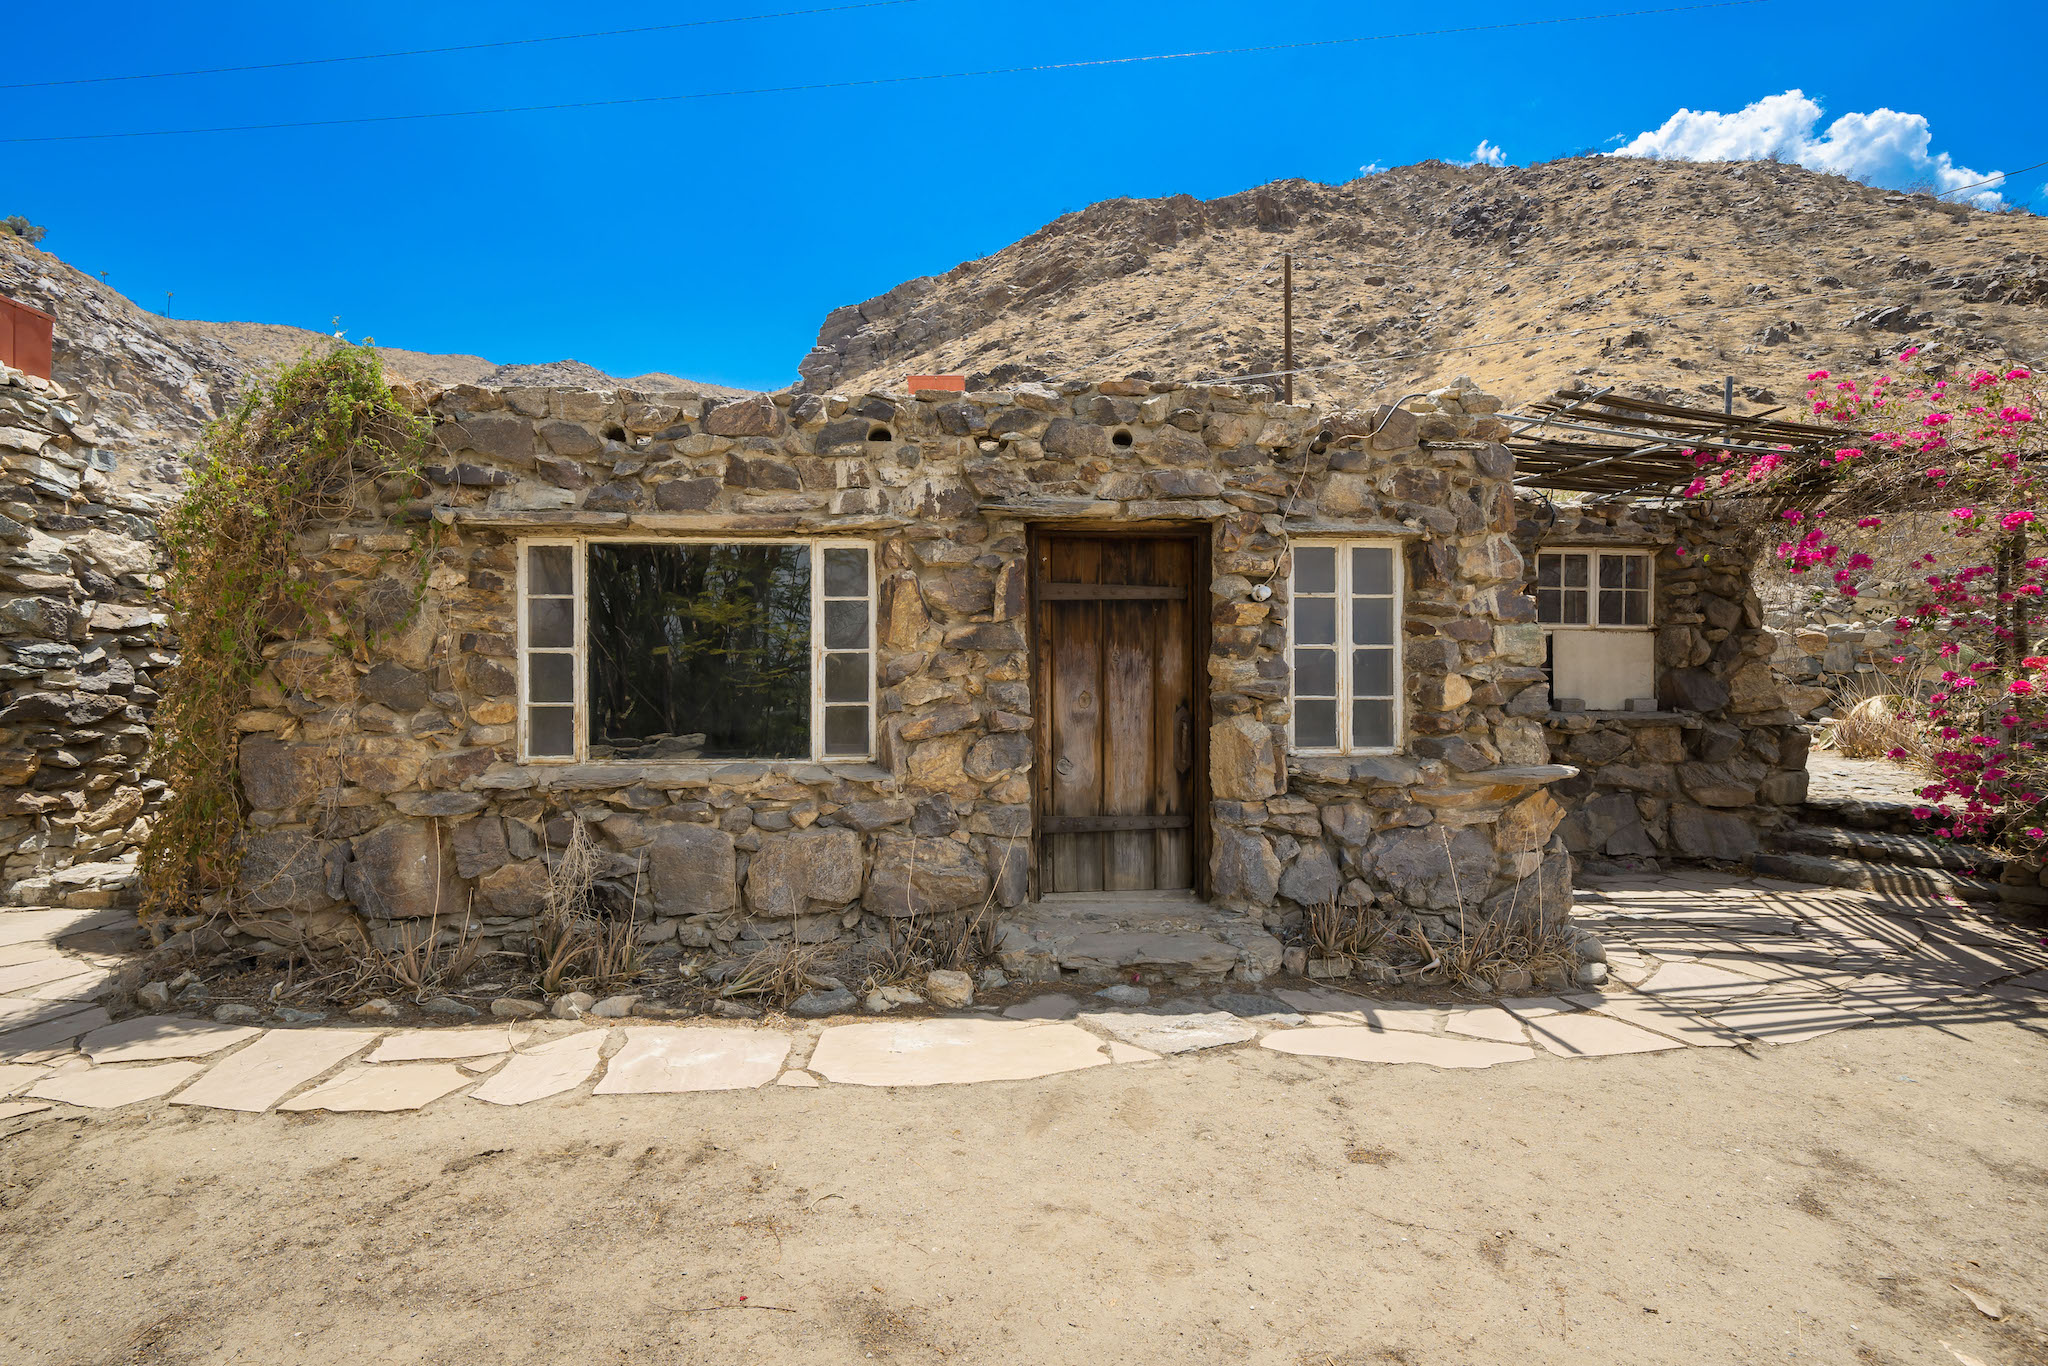 Palm Springs Araby rock homes for sale for the first time in 45 years